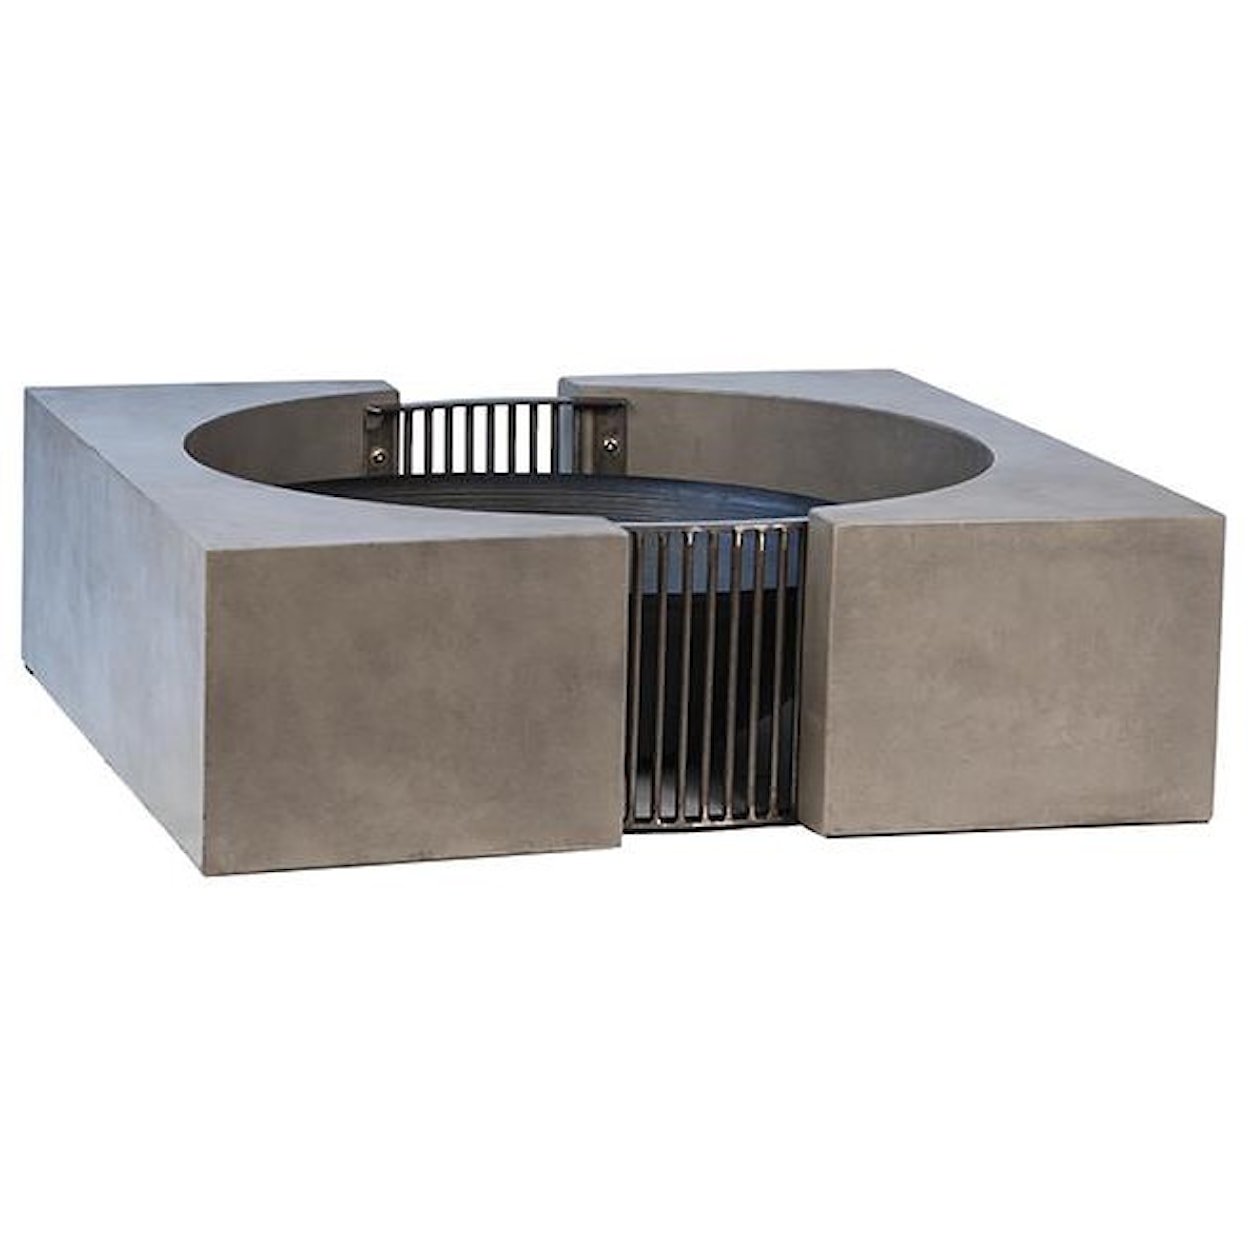 Dovetail Furniture Accessories Fire Pit